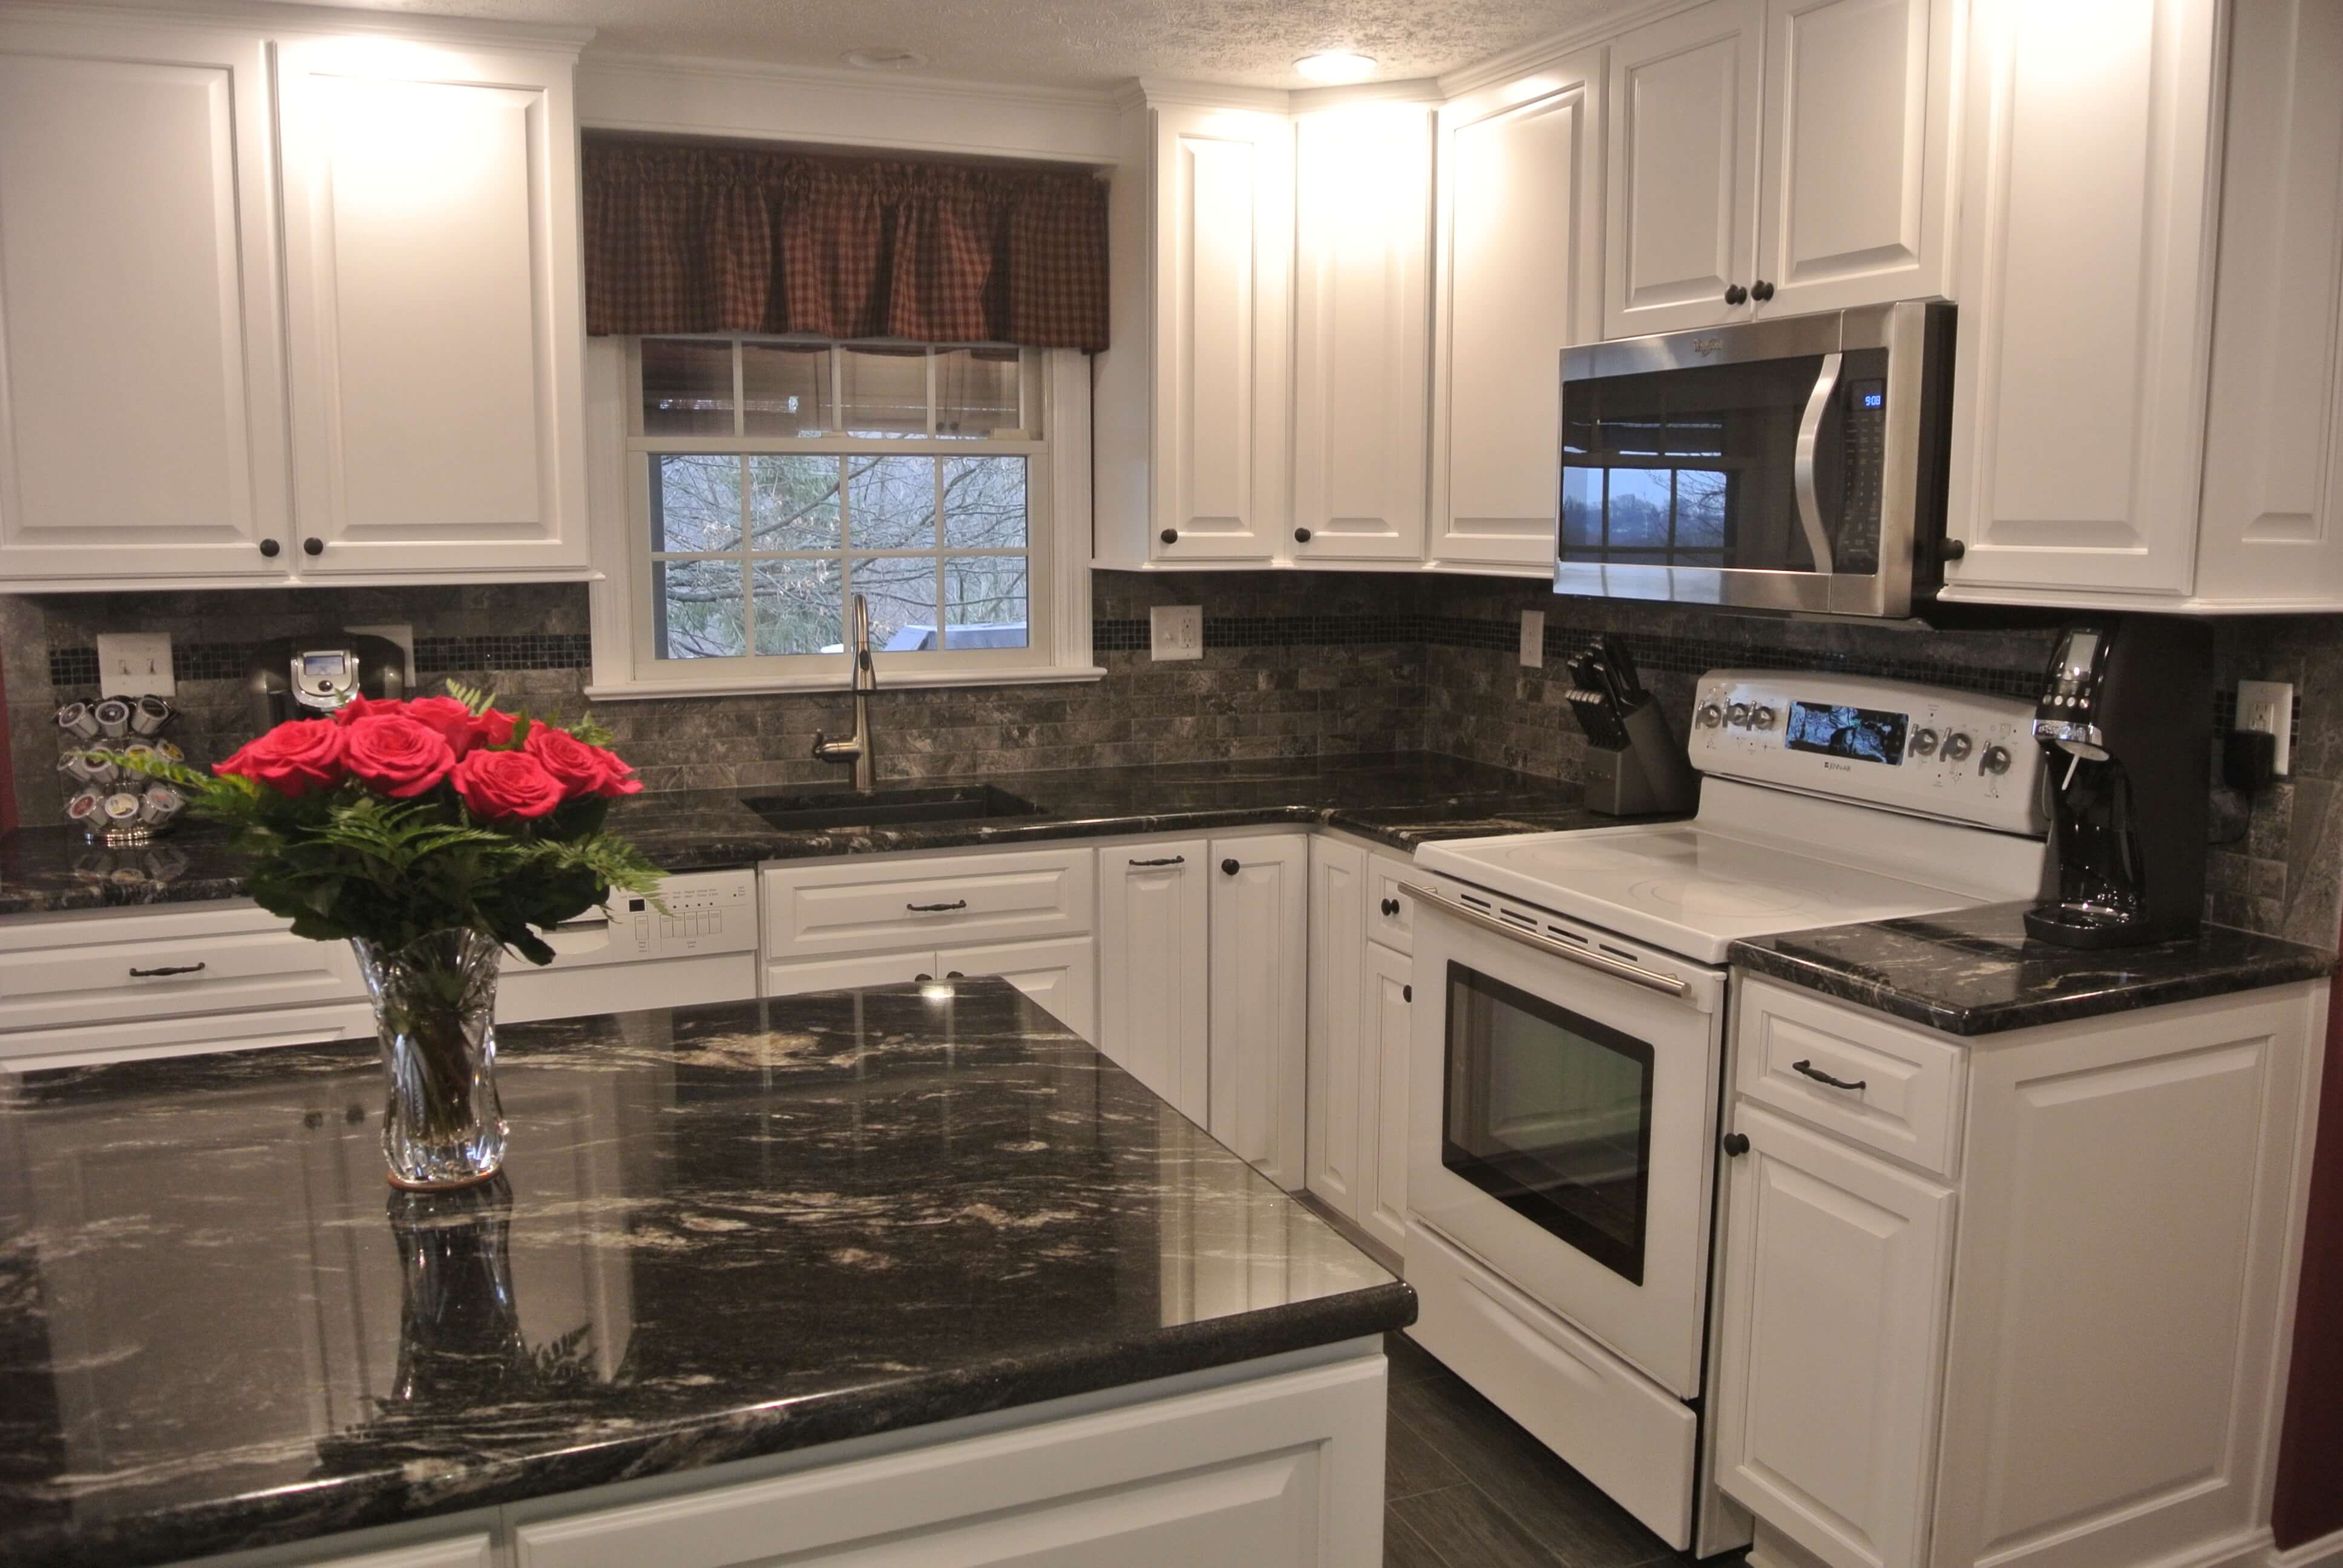 Beautiful countertops complete the look of this kitchen.